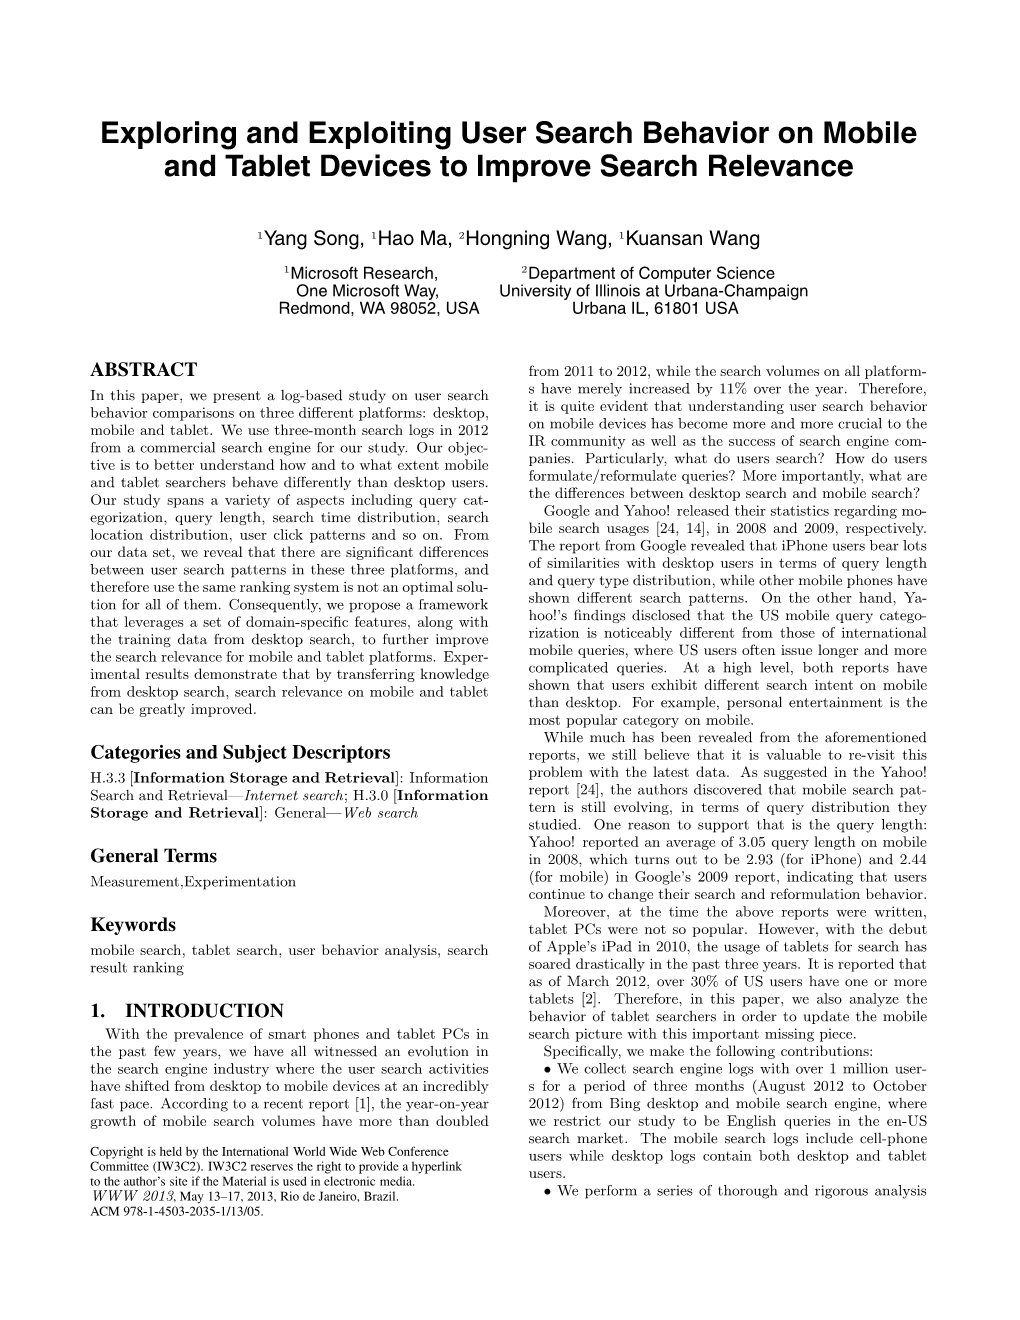 Exploring and Exploiting User Search Behavior on Mobile and Tablet Devices to Improve Search Relevance